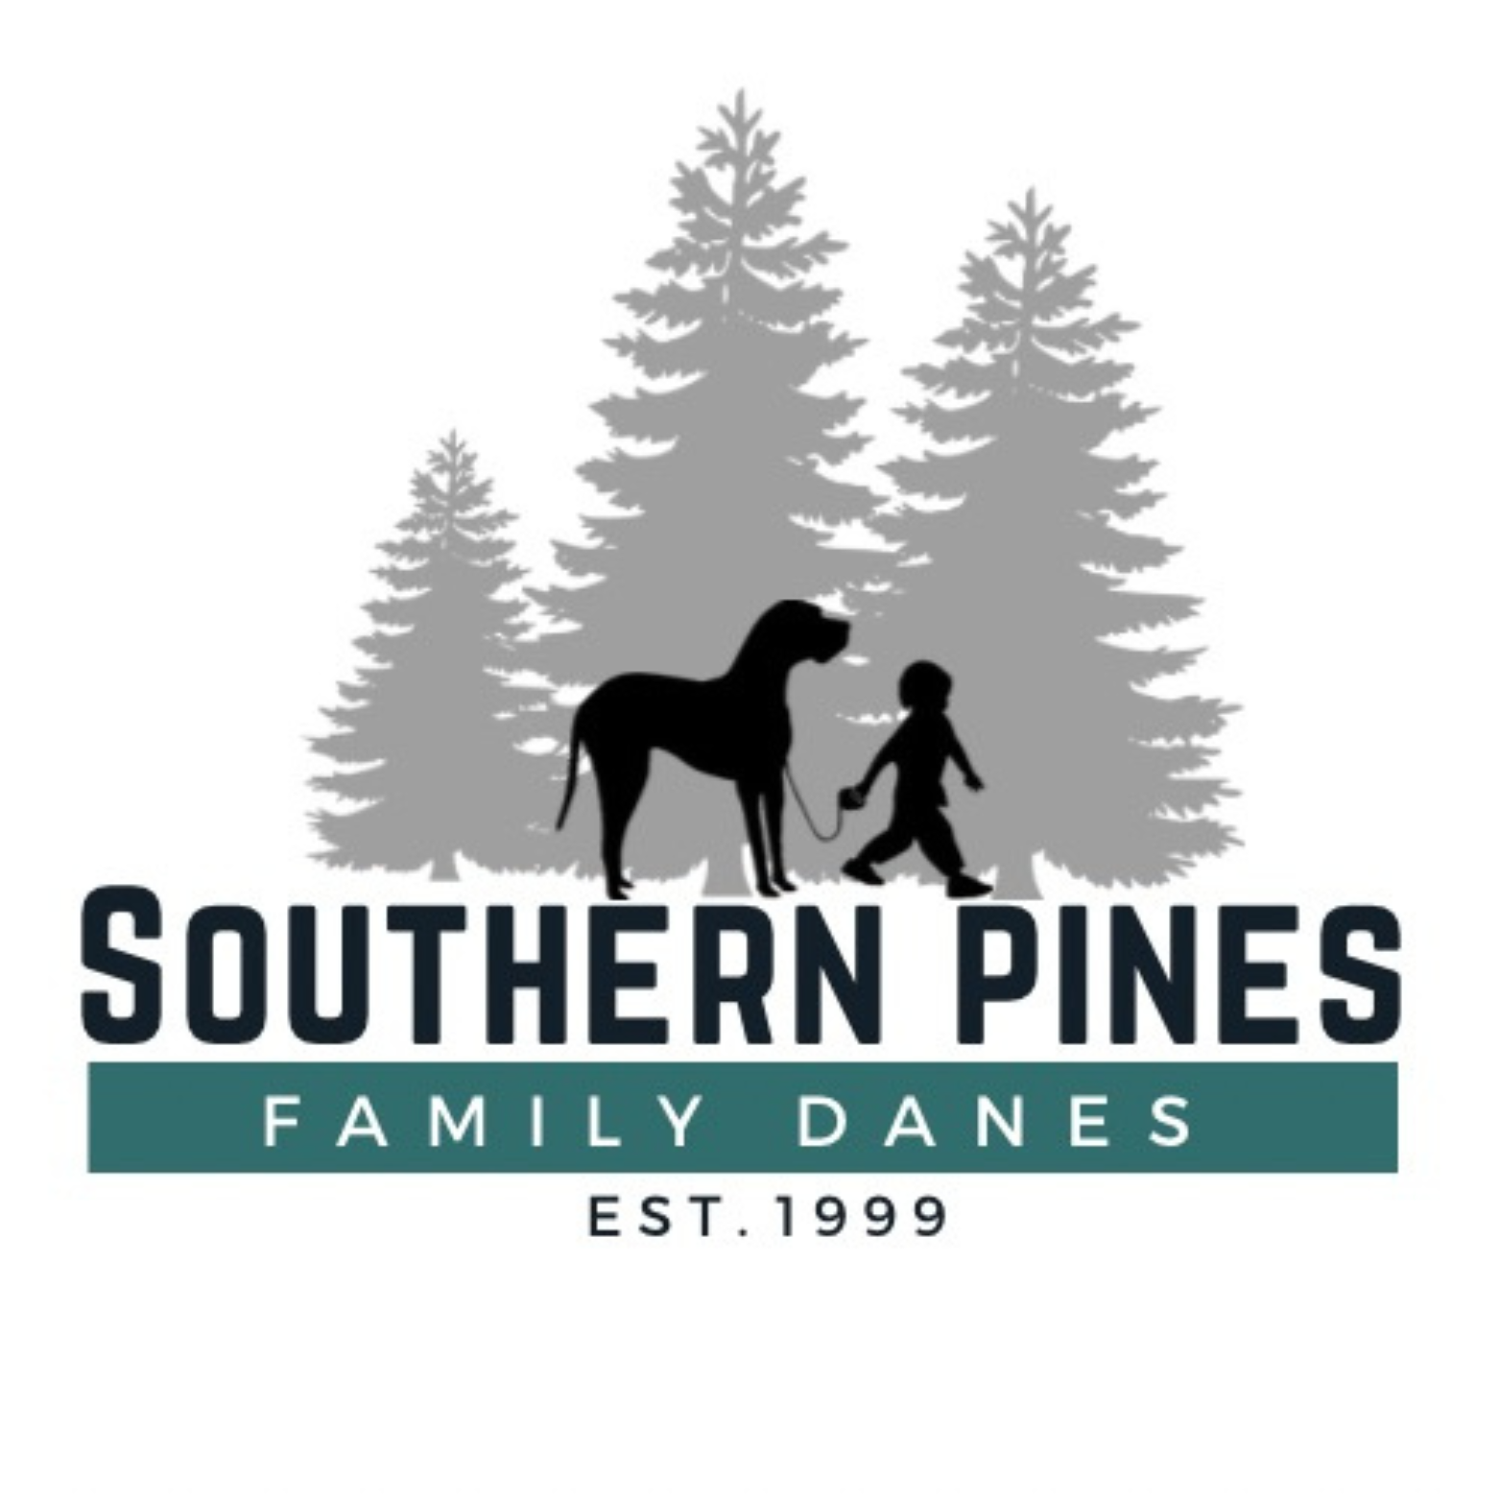 Southern Pines Family Danes